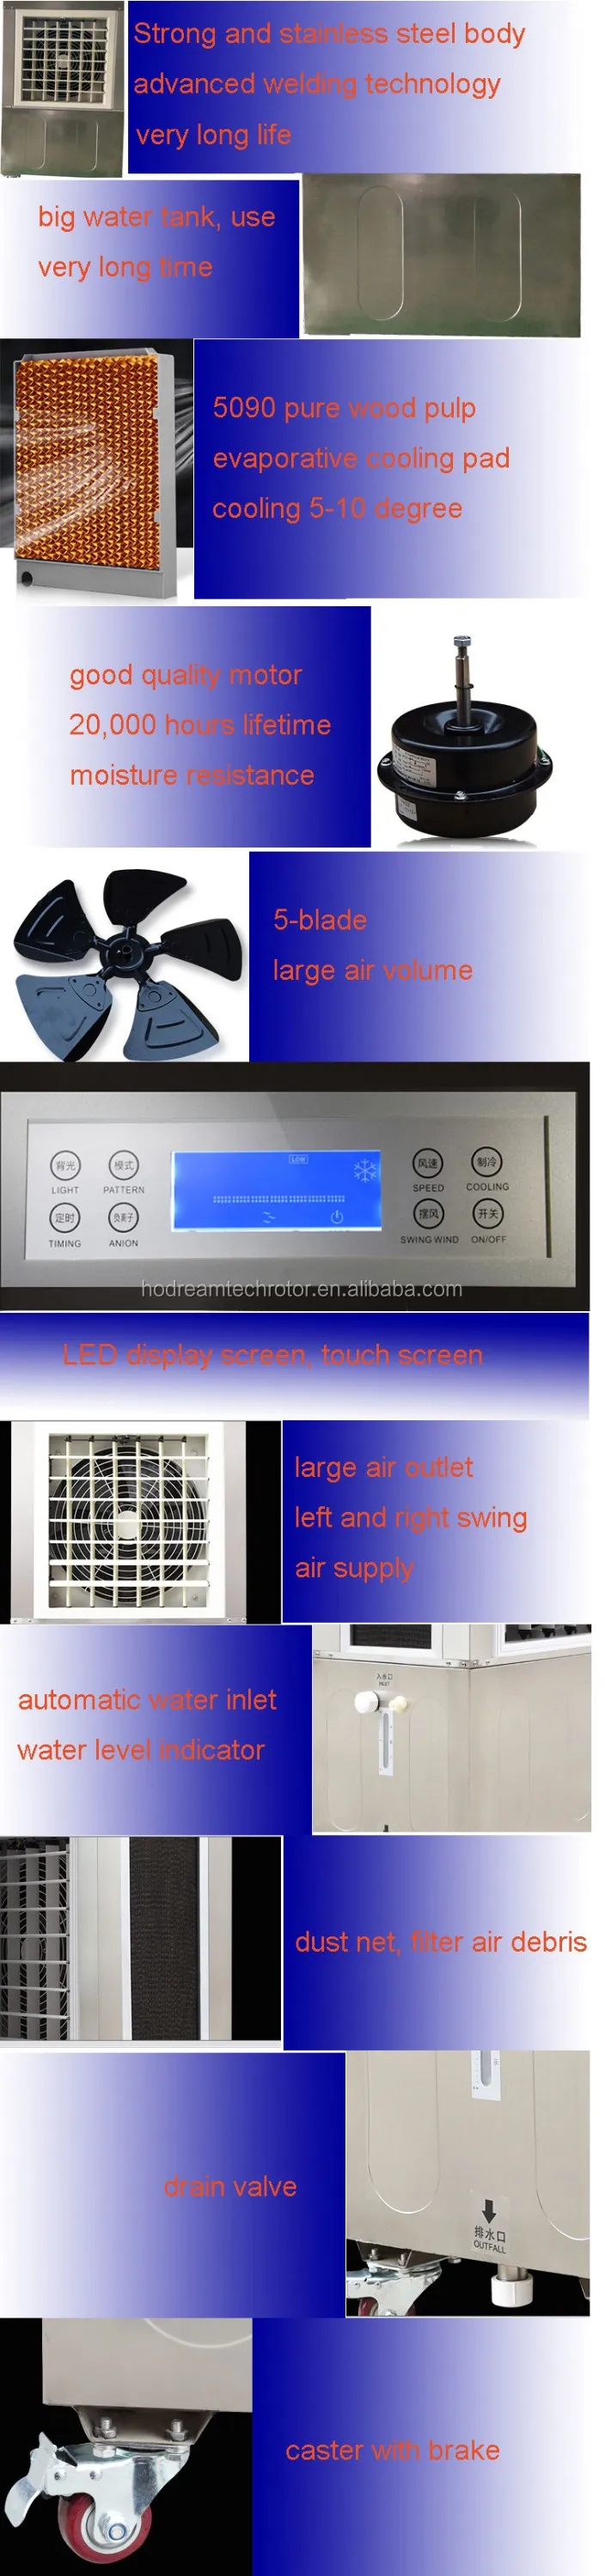 advantage and details of portable air cooler.jpg